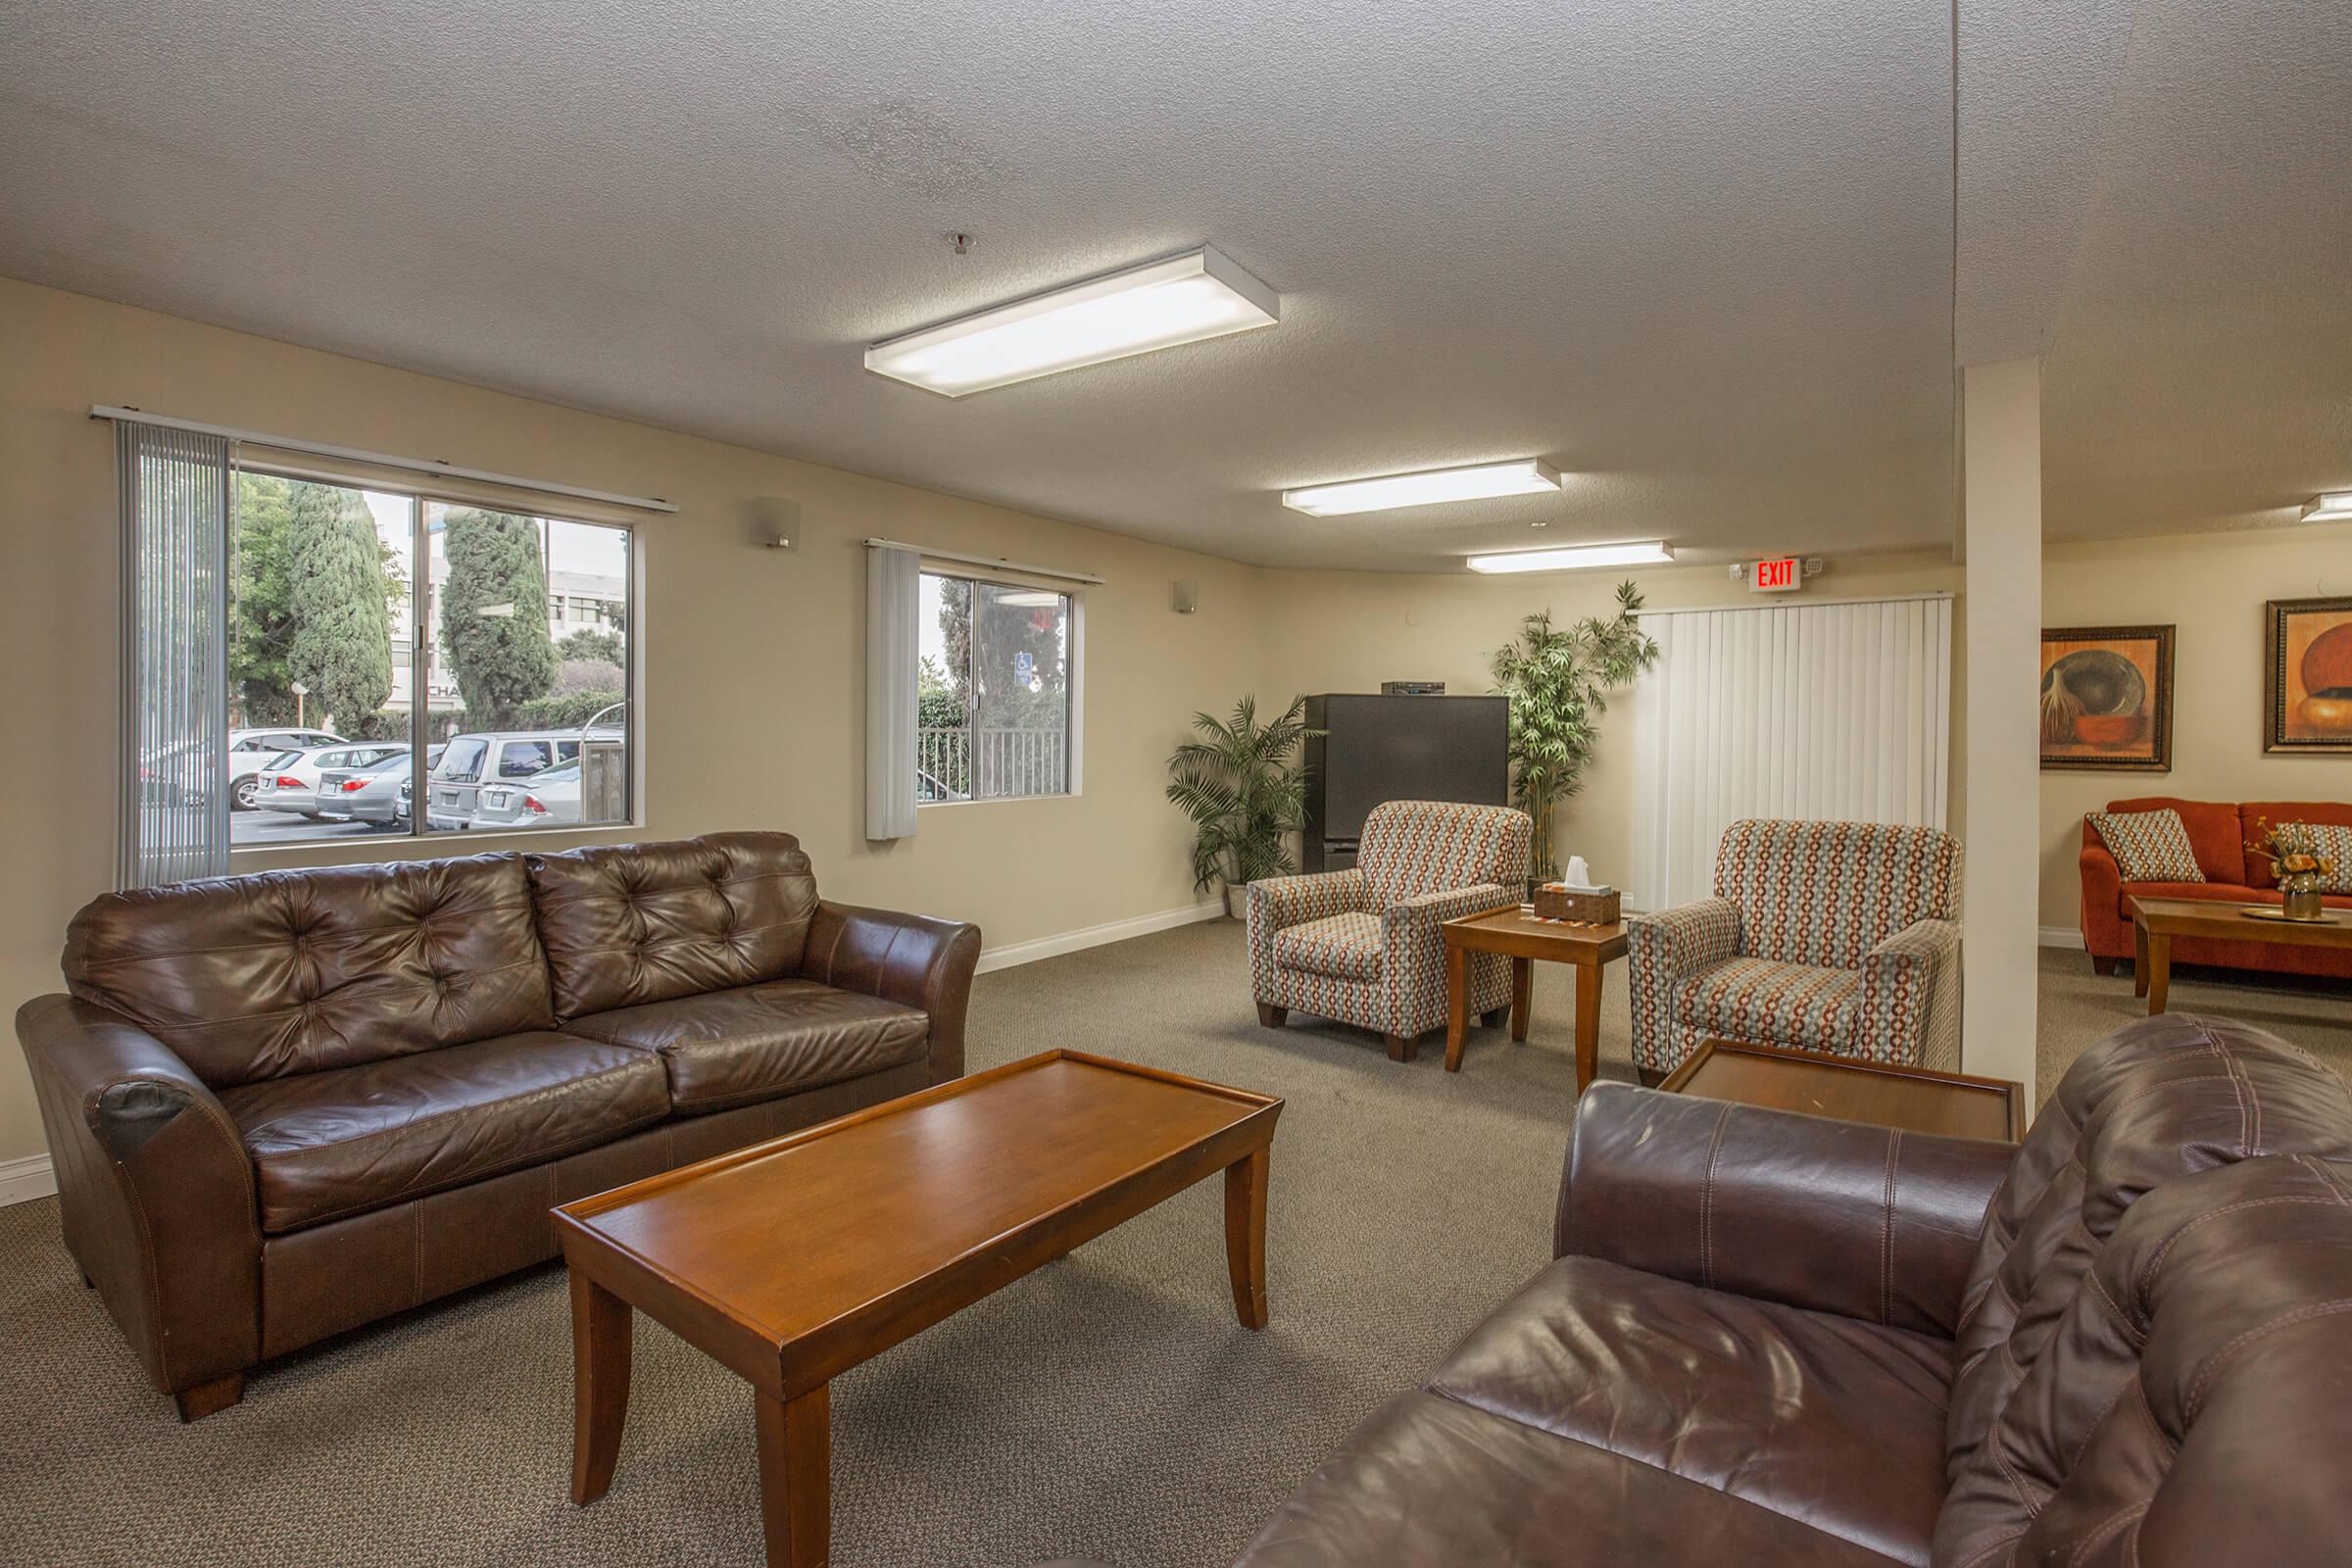 New Horizon Village Senior Apartment Homes community room with leather couches